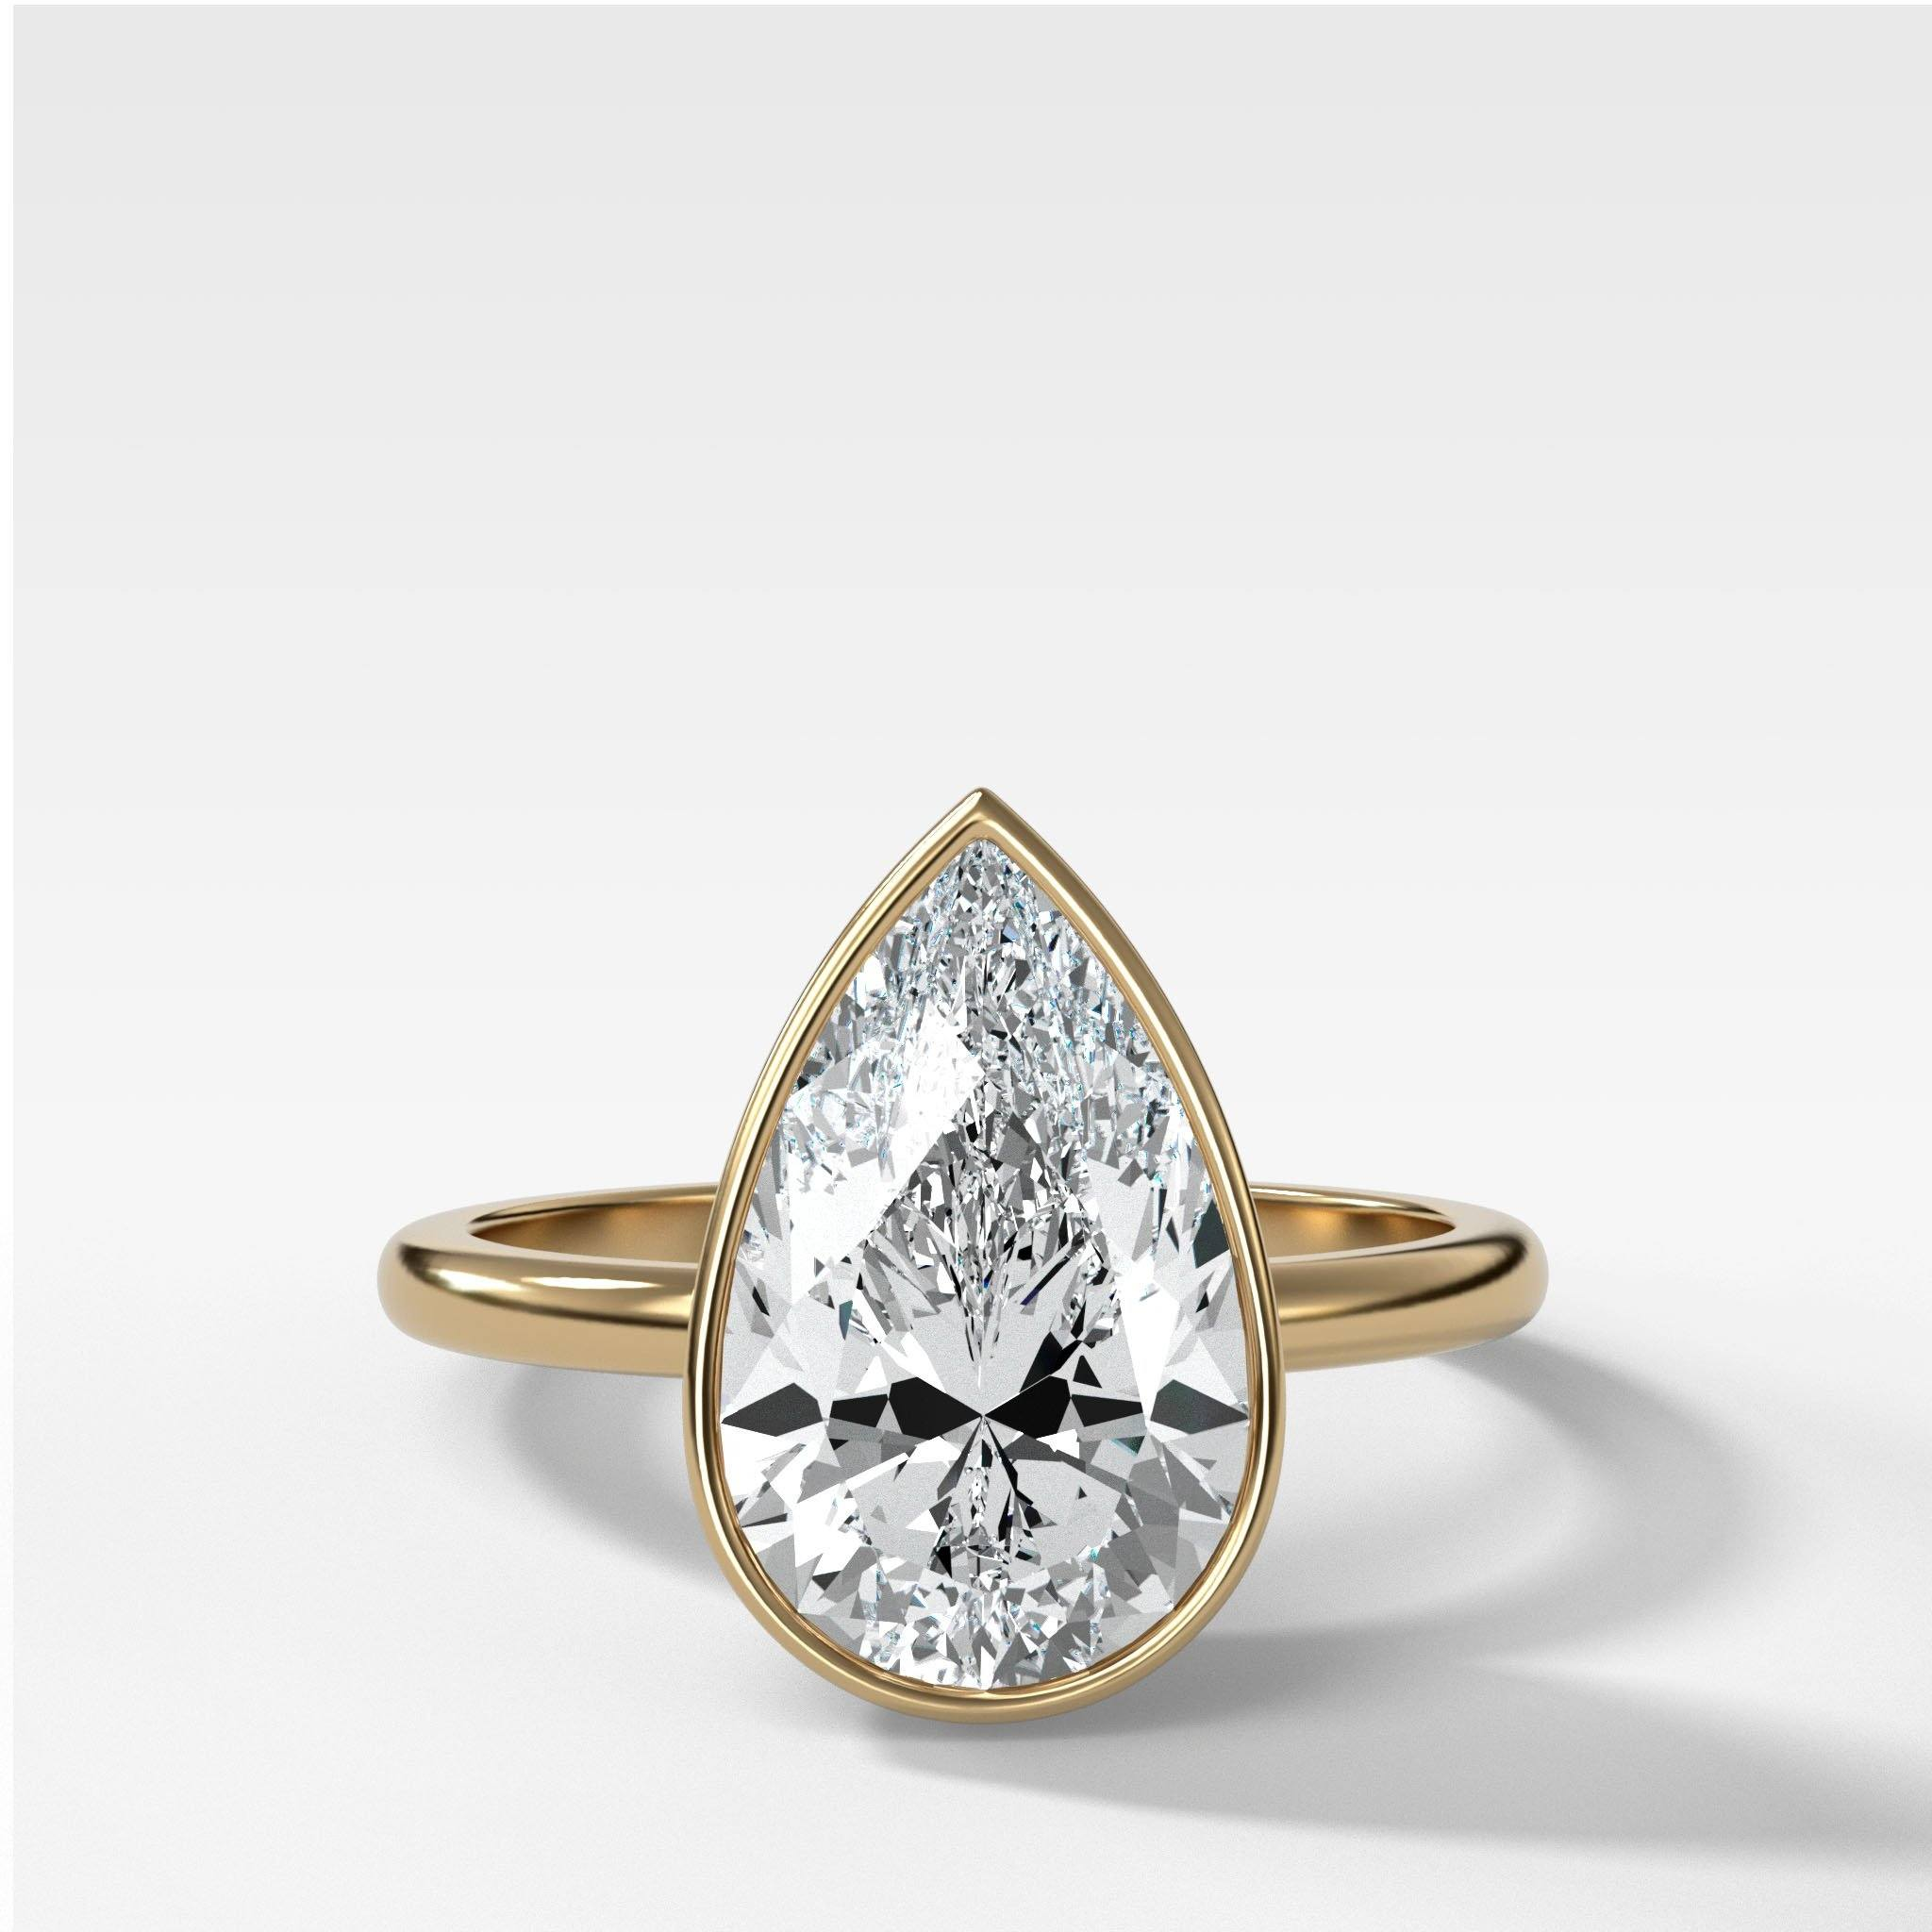 3 carat pear shaped engagement ring